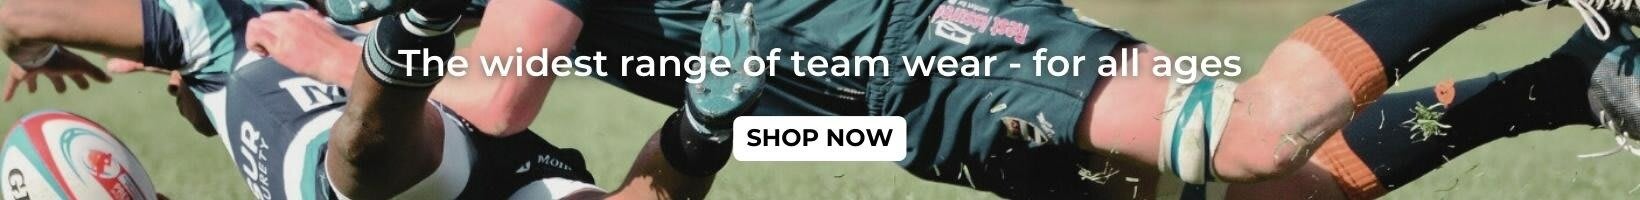 Dominate the Field: Discover Team Sports Gear and Equipment at Best Prices